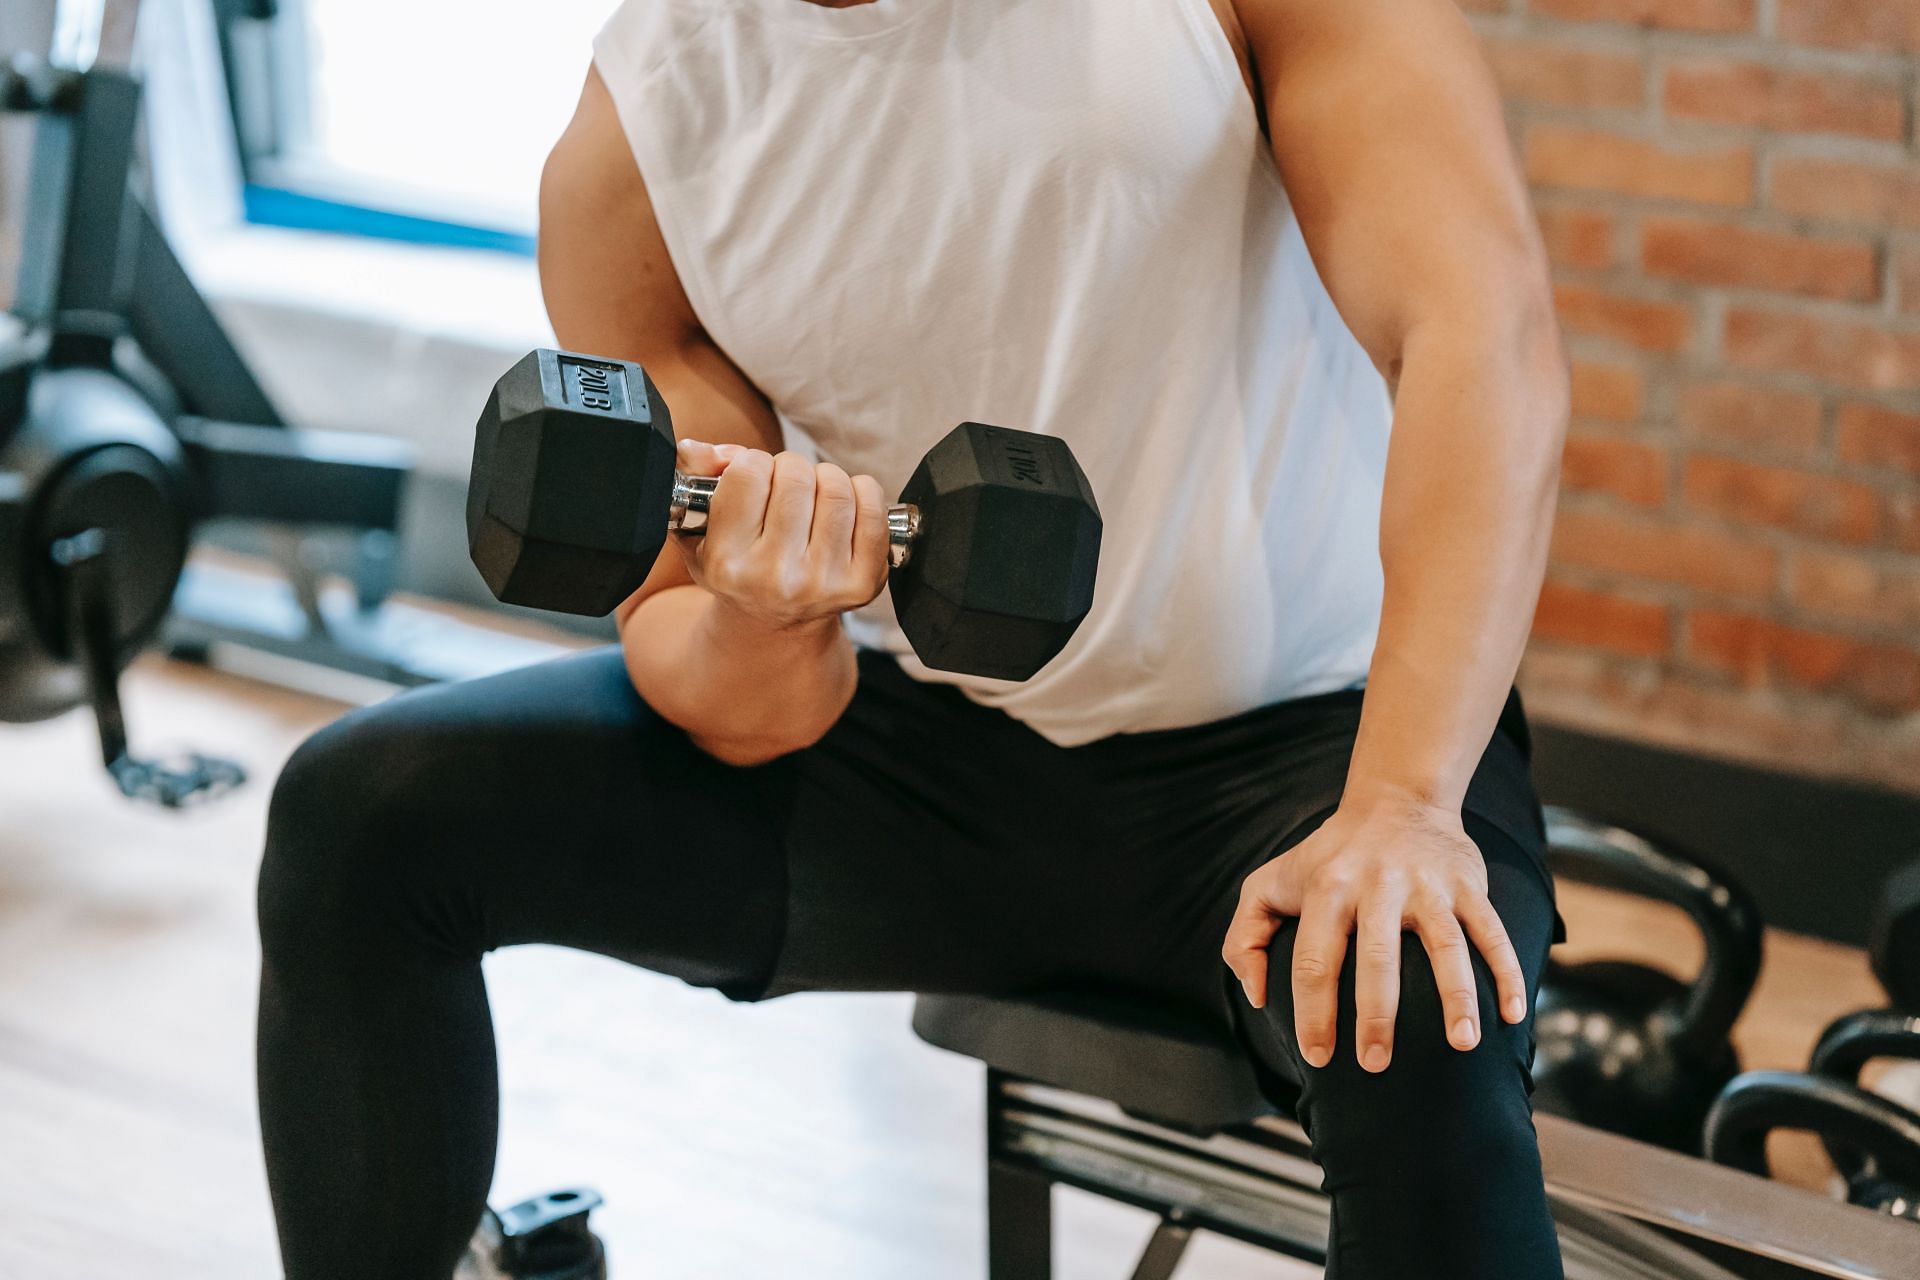 Dumbbell exercises to reduce man boobs. (Image via Pexels/Andres Ayrton)